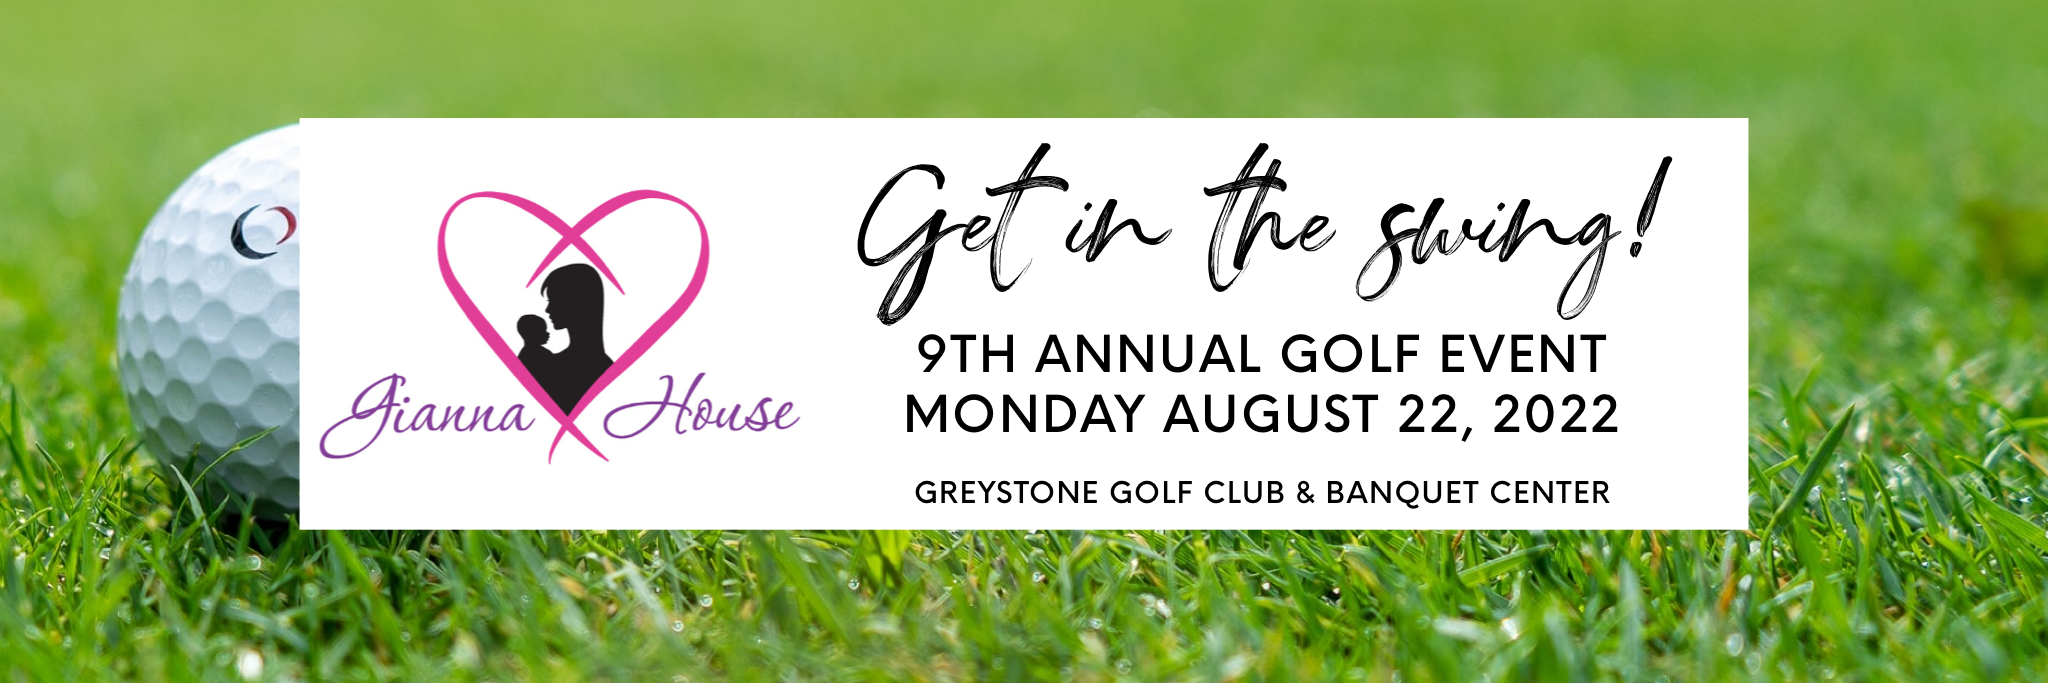 Golf Outing Website Banner